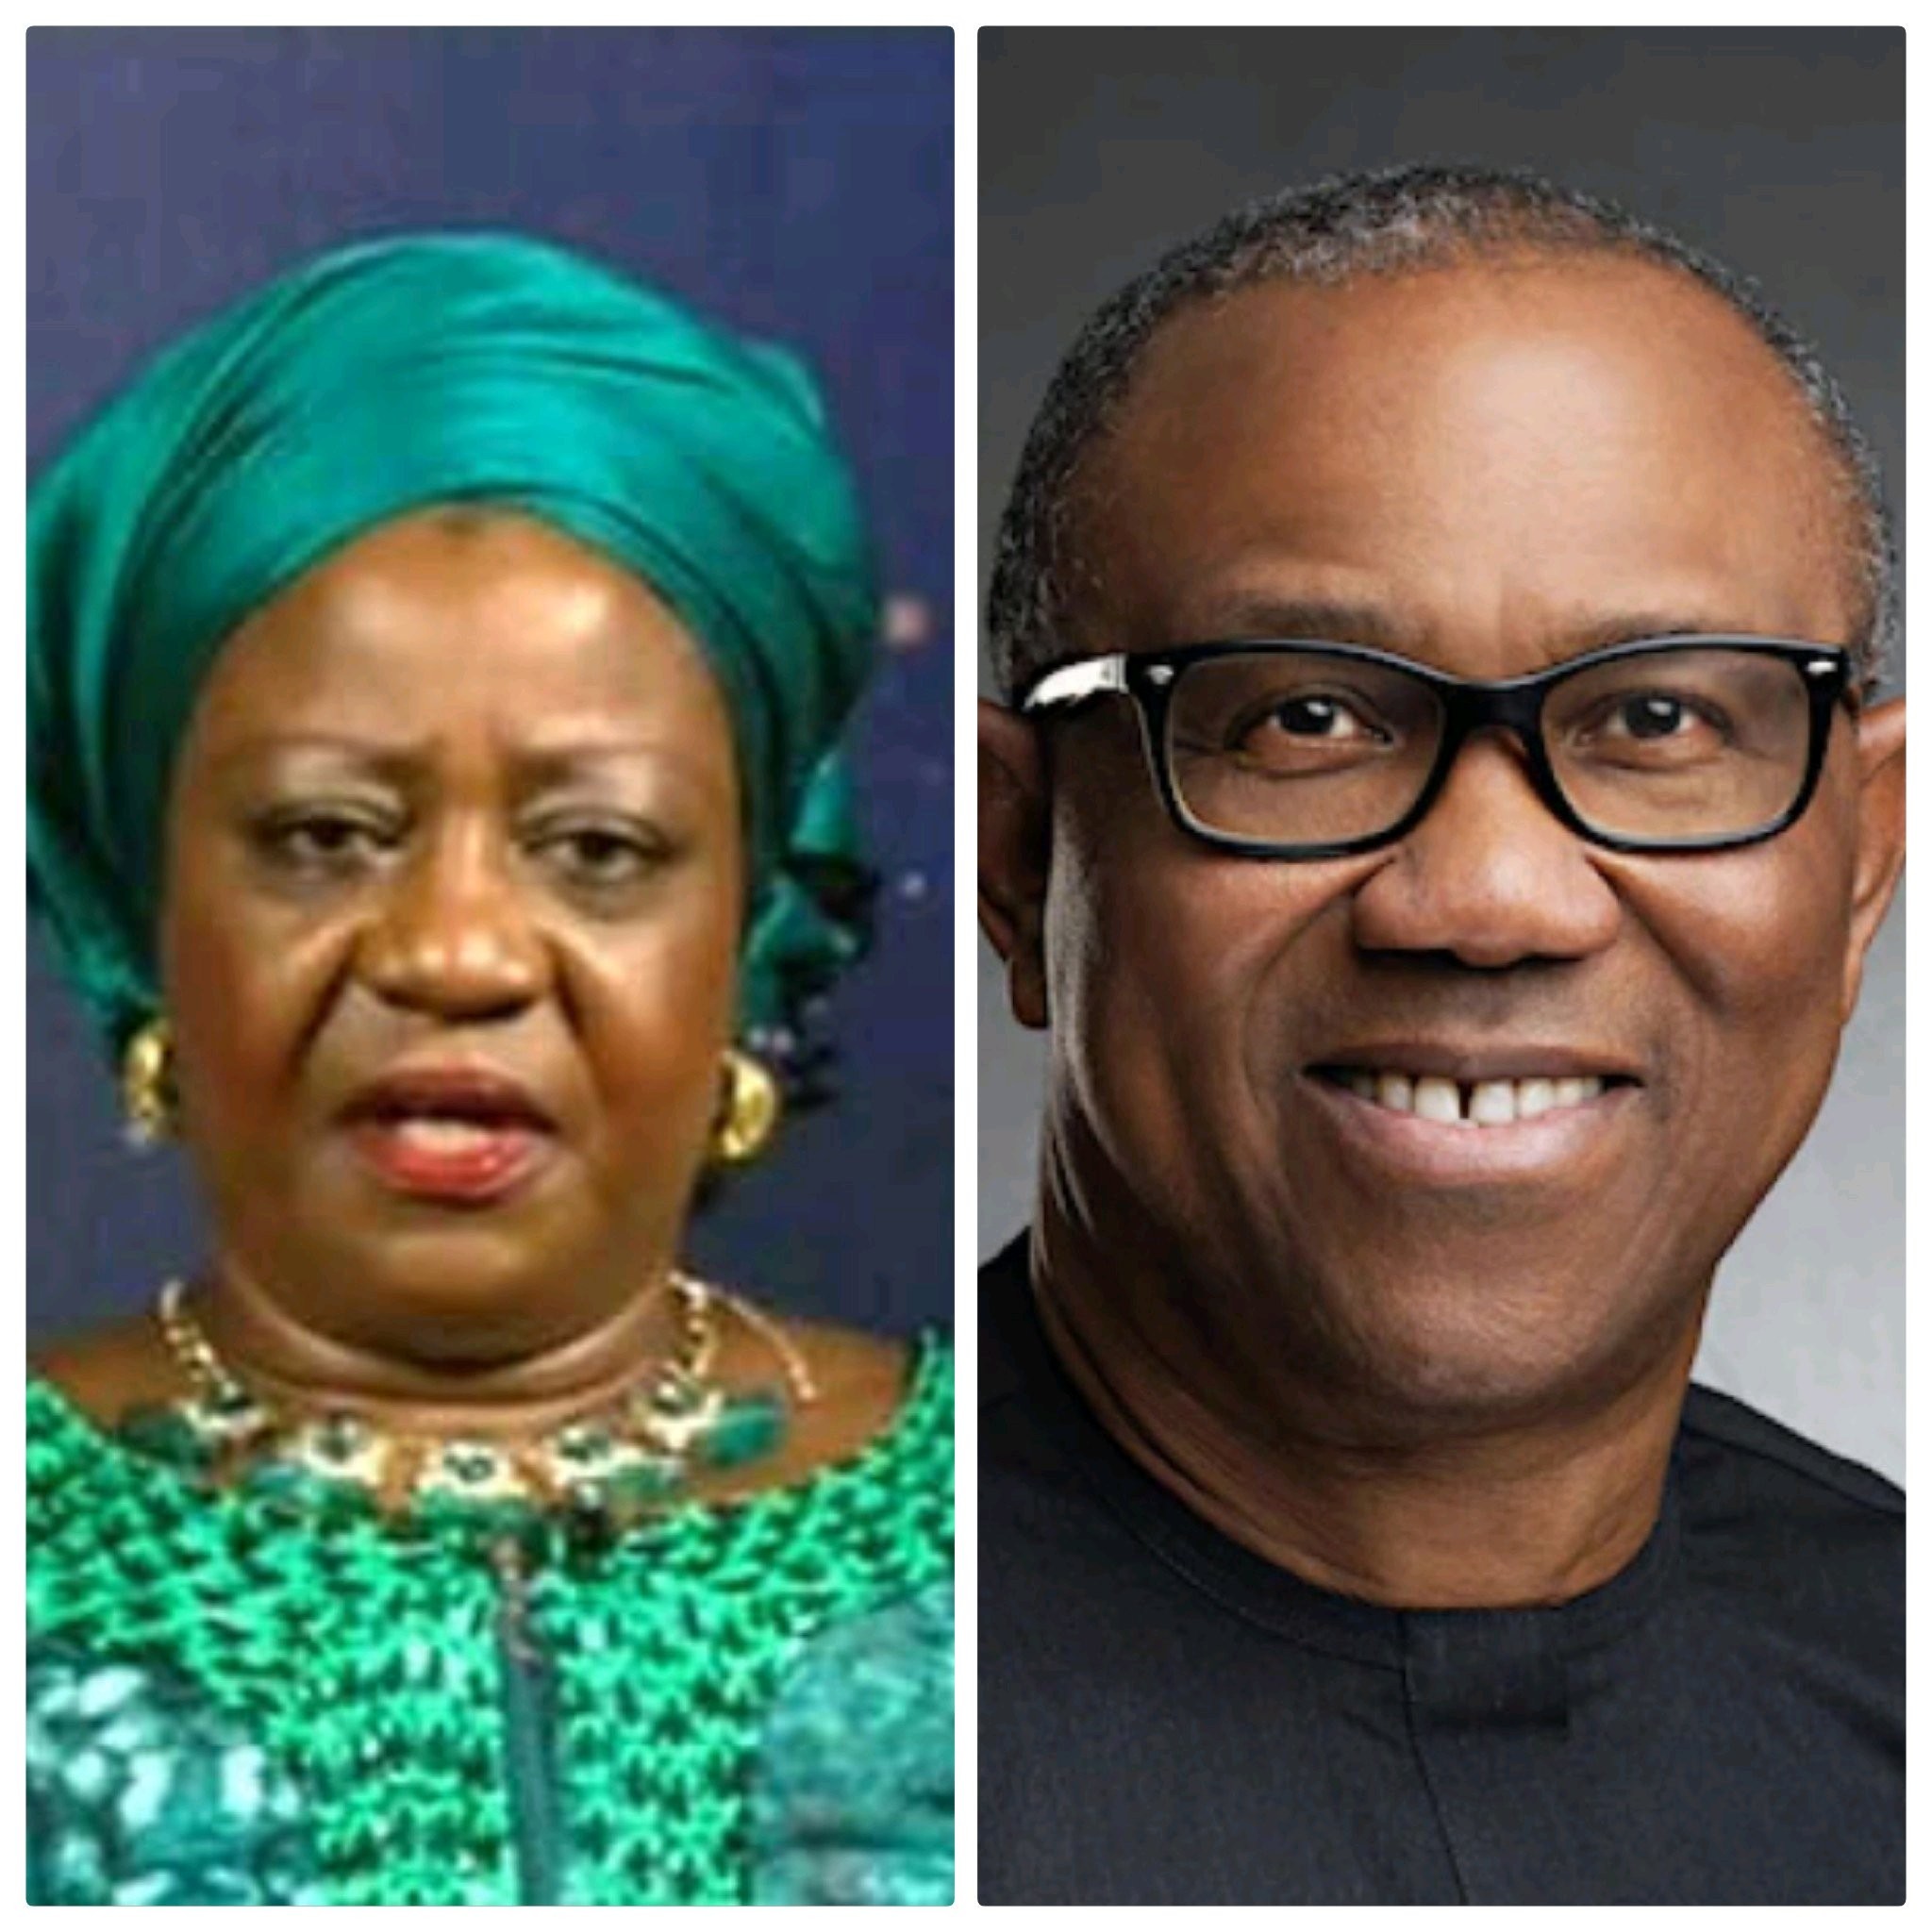 Looks like Peter Obi is on his way back to APGA. The vow he freely made and broke by himself, is haunting him - According to Lauretta Onochie